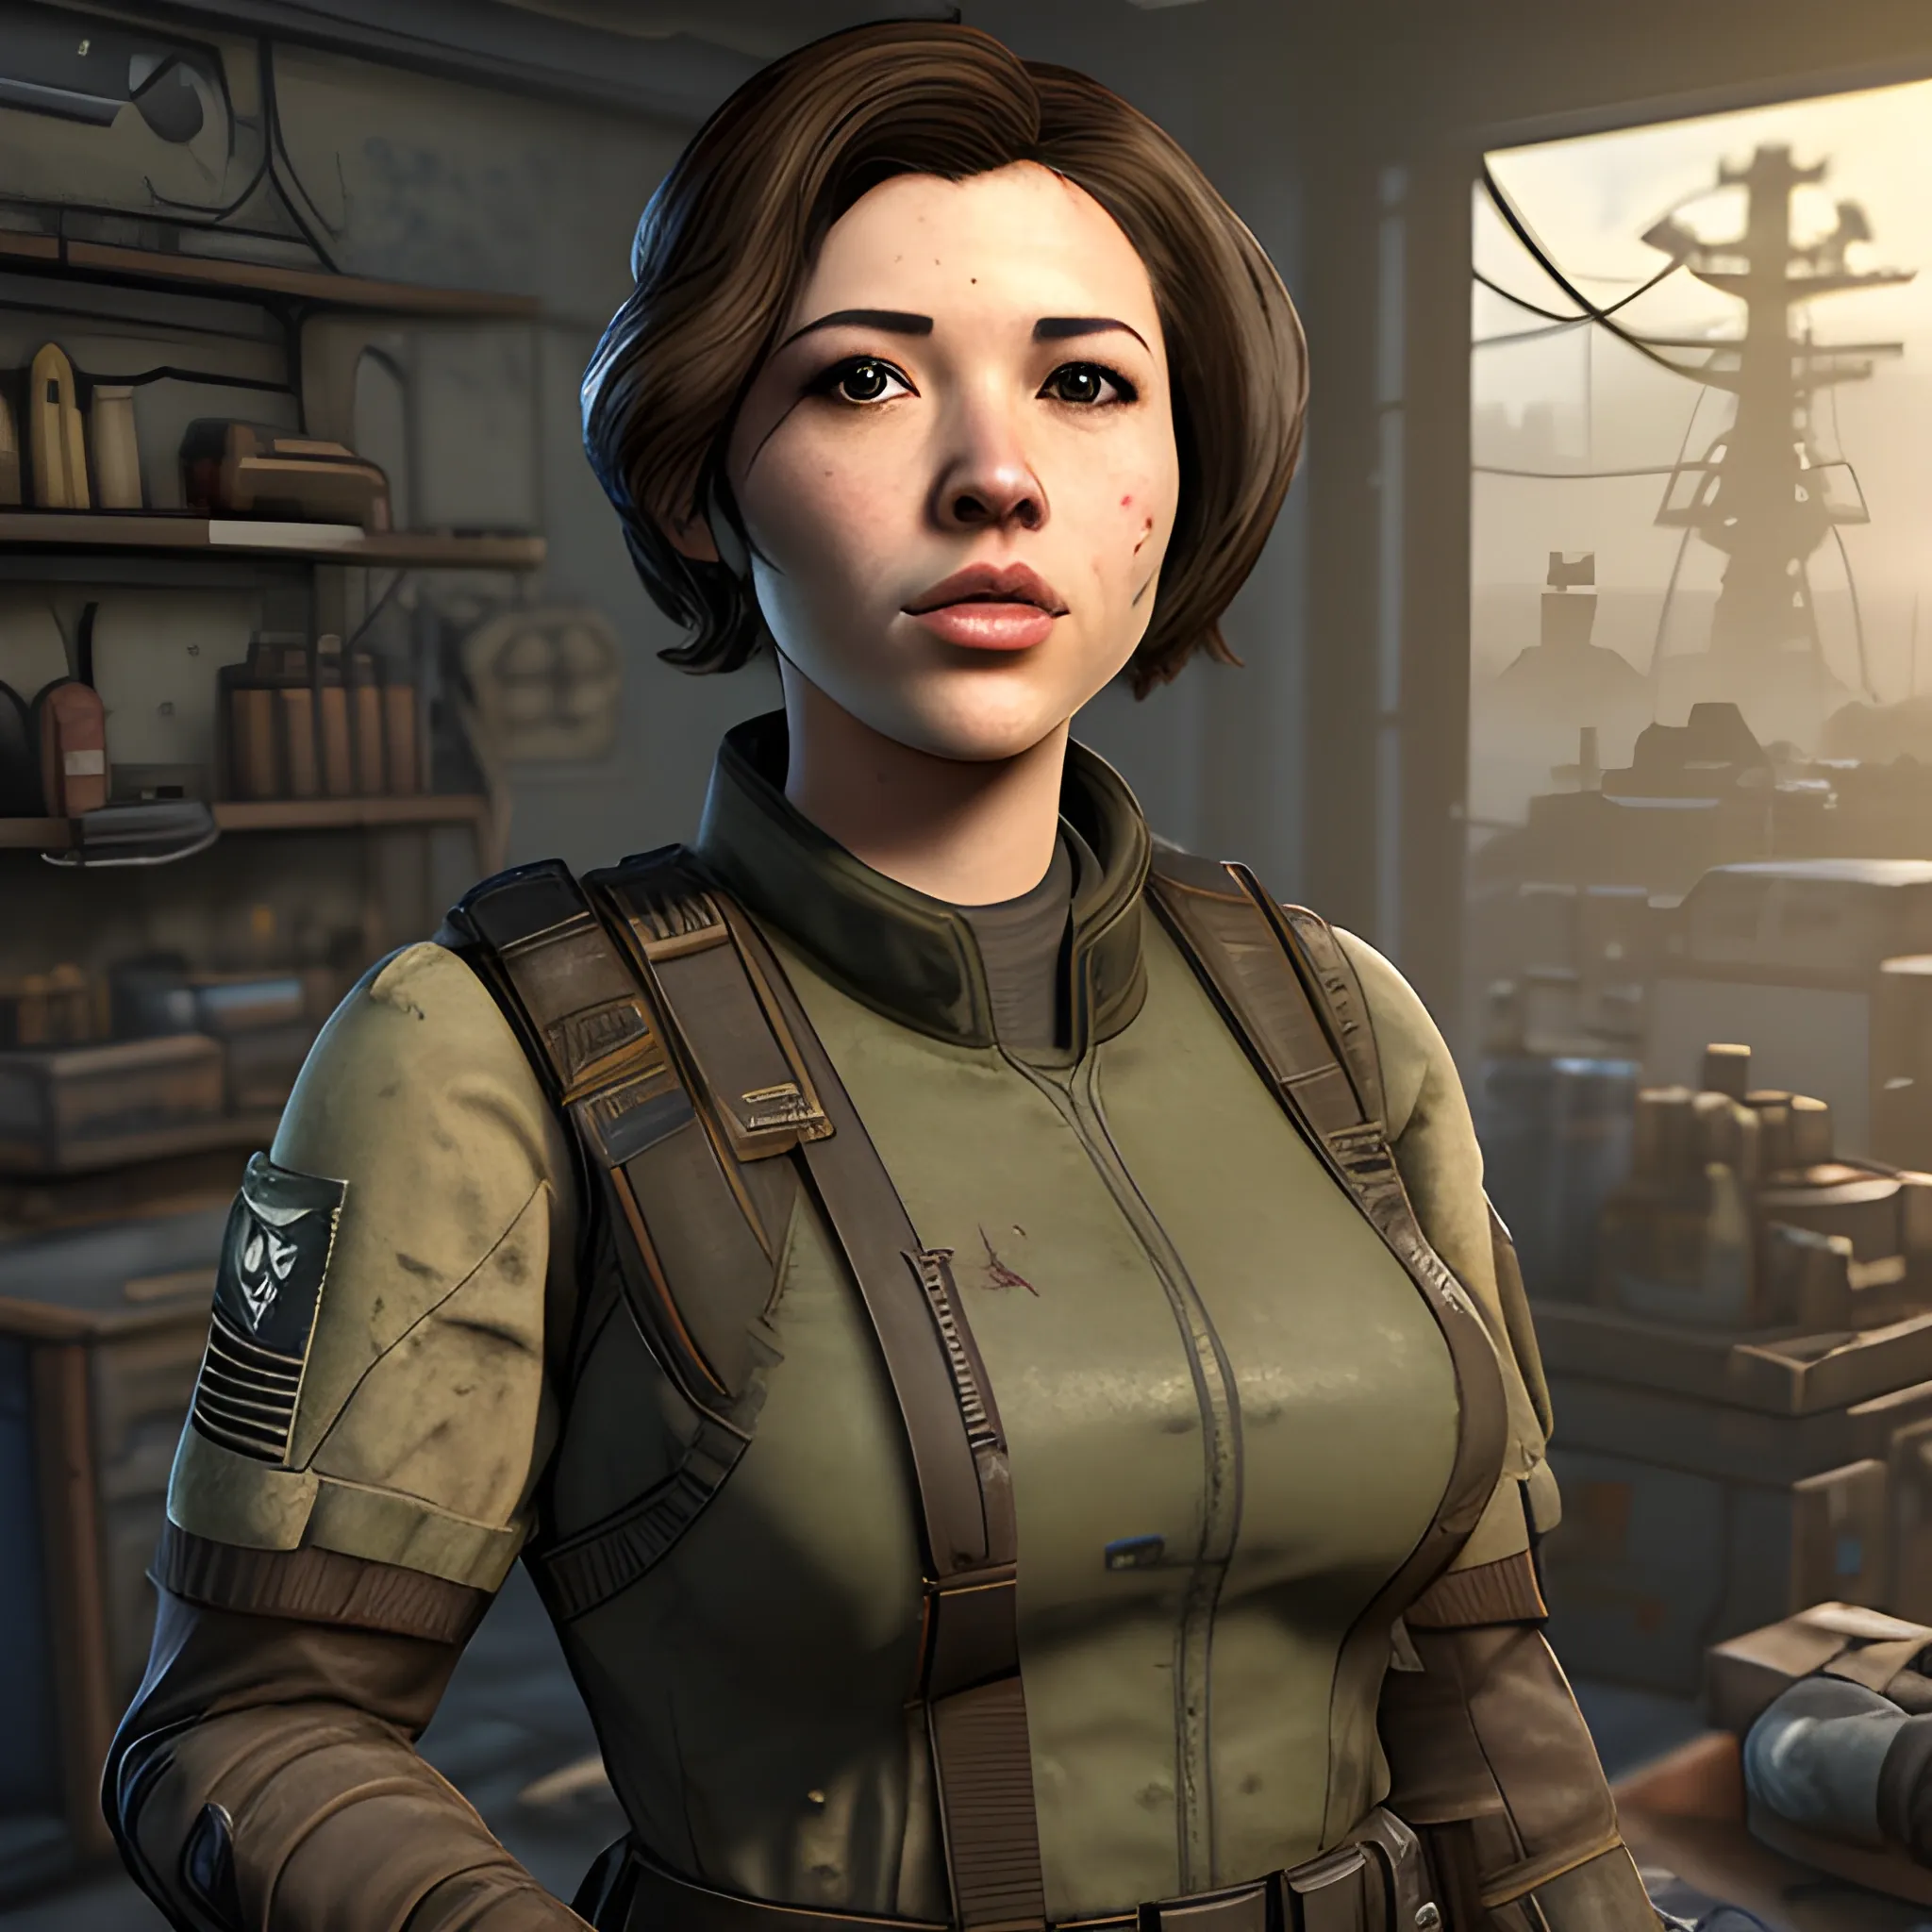 In the style of Fallout 4, masterpiece, Kaylee from Firefly as a Brotherhood of Steel Scribe with a dirty face in a brown uniform and black tactical vest on top full of tools and notebooks